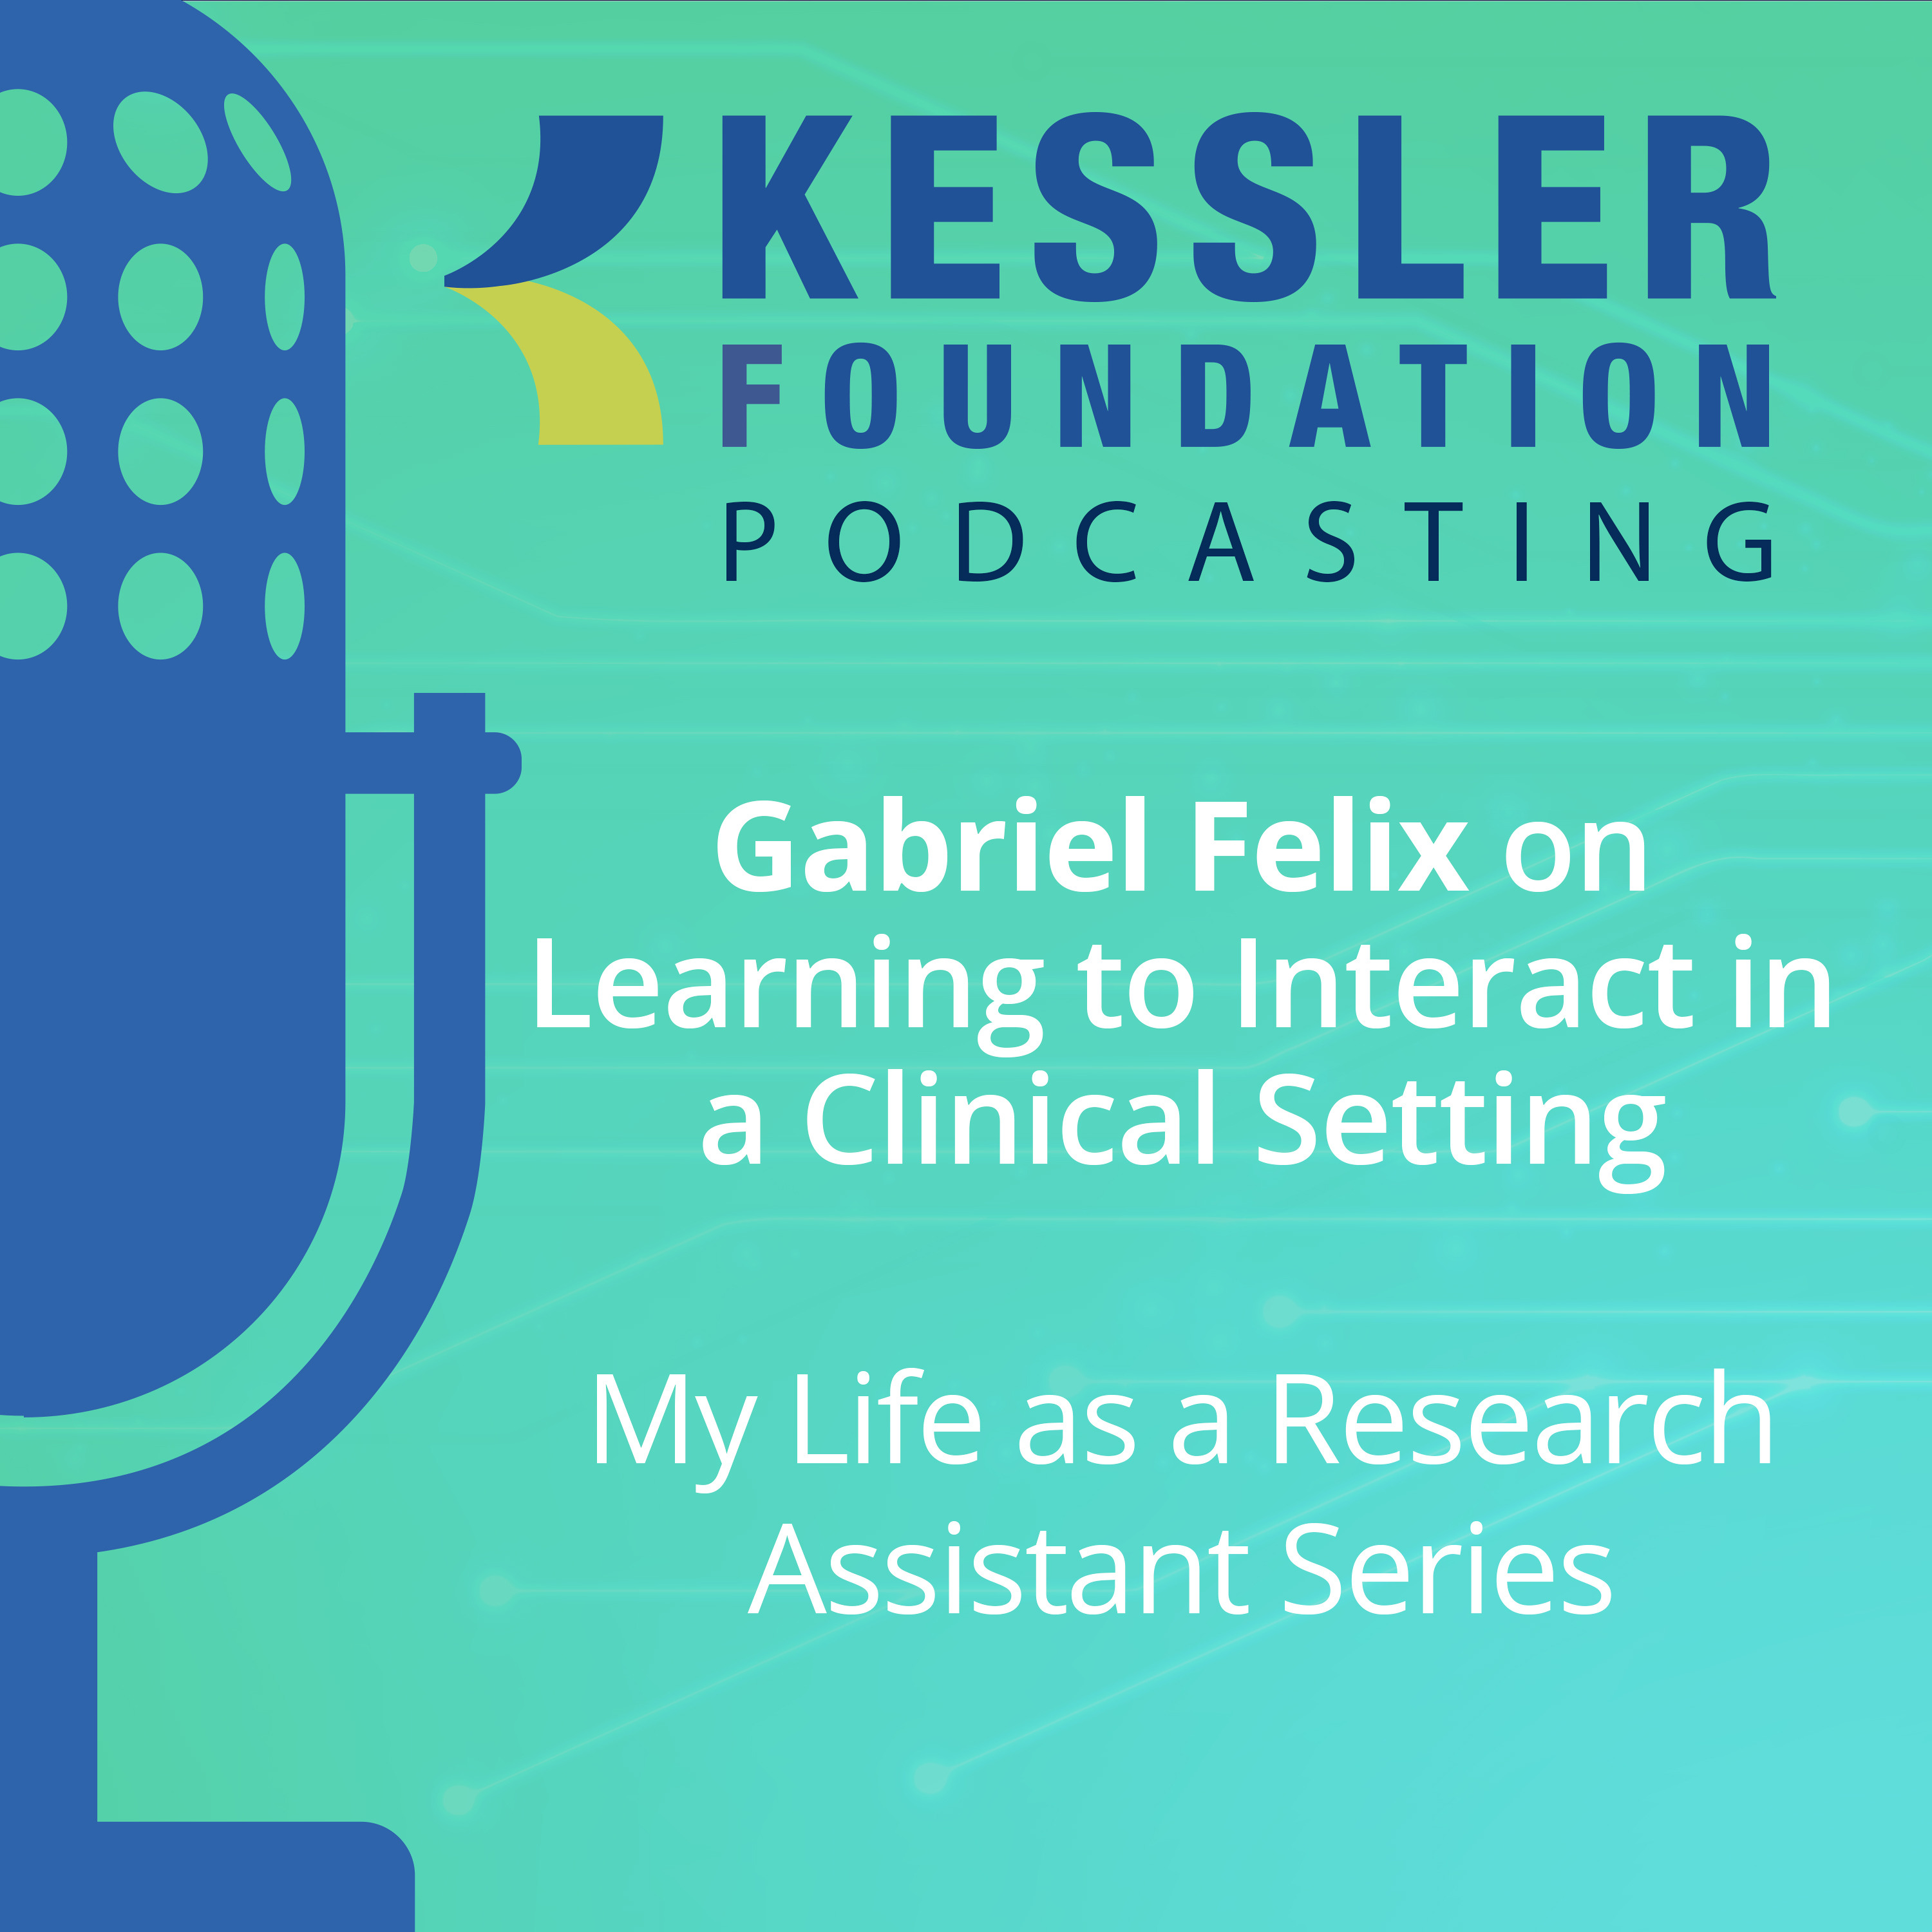 Gabriel Felix on Learning to Interact in a Clinical Setting